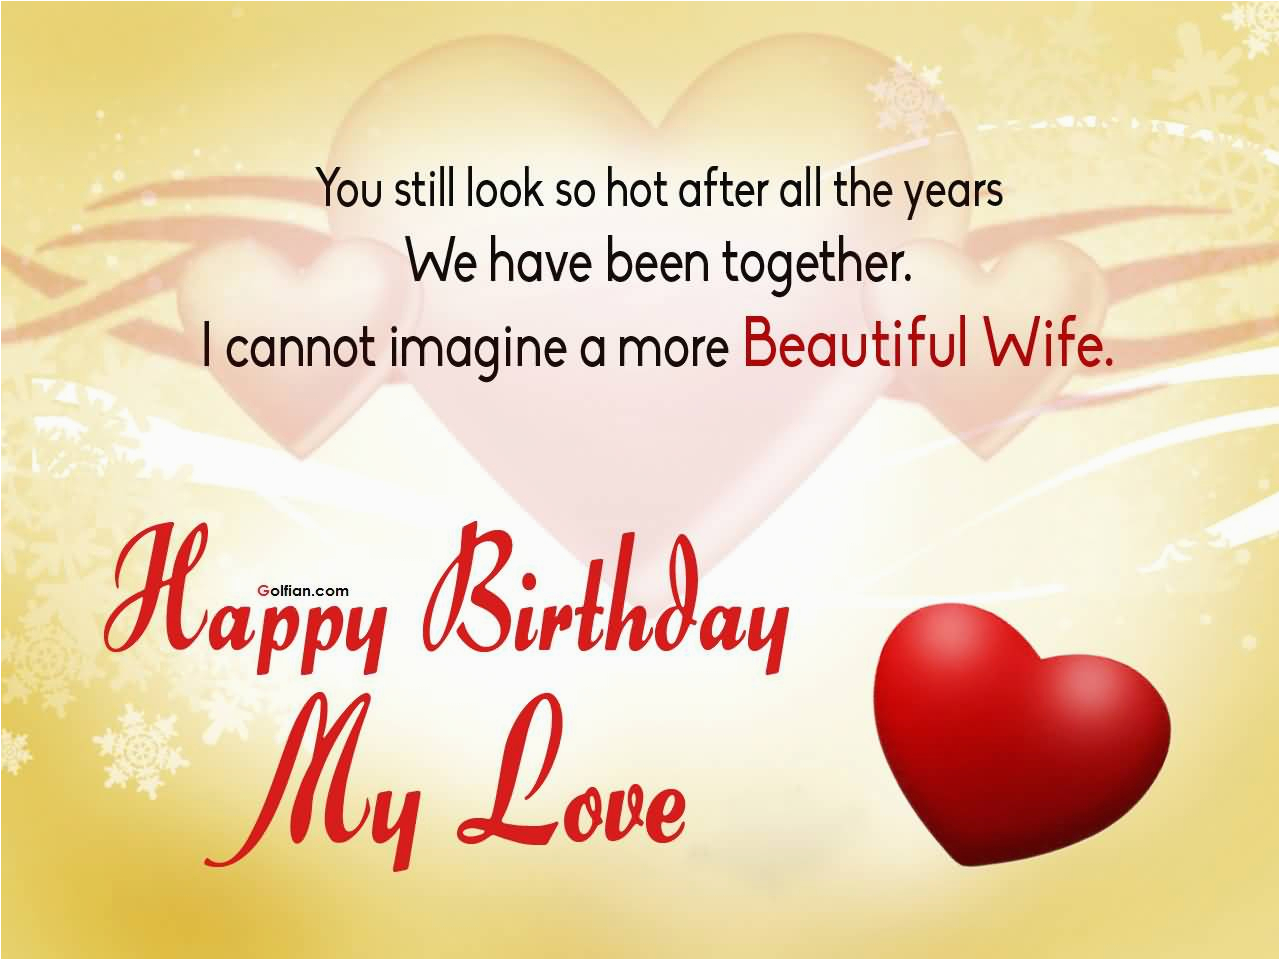 60 most beautiful wife birthday quotes nice birthday sayings for life partner